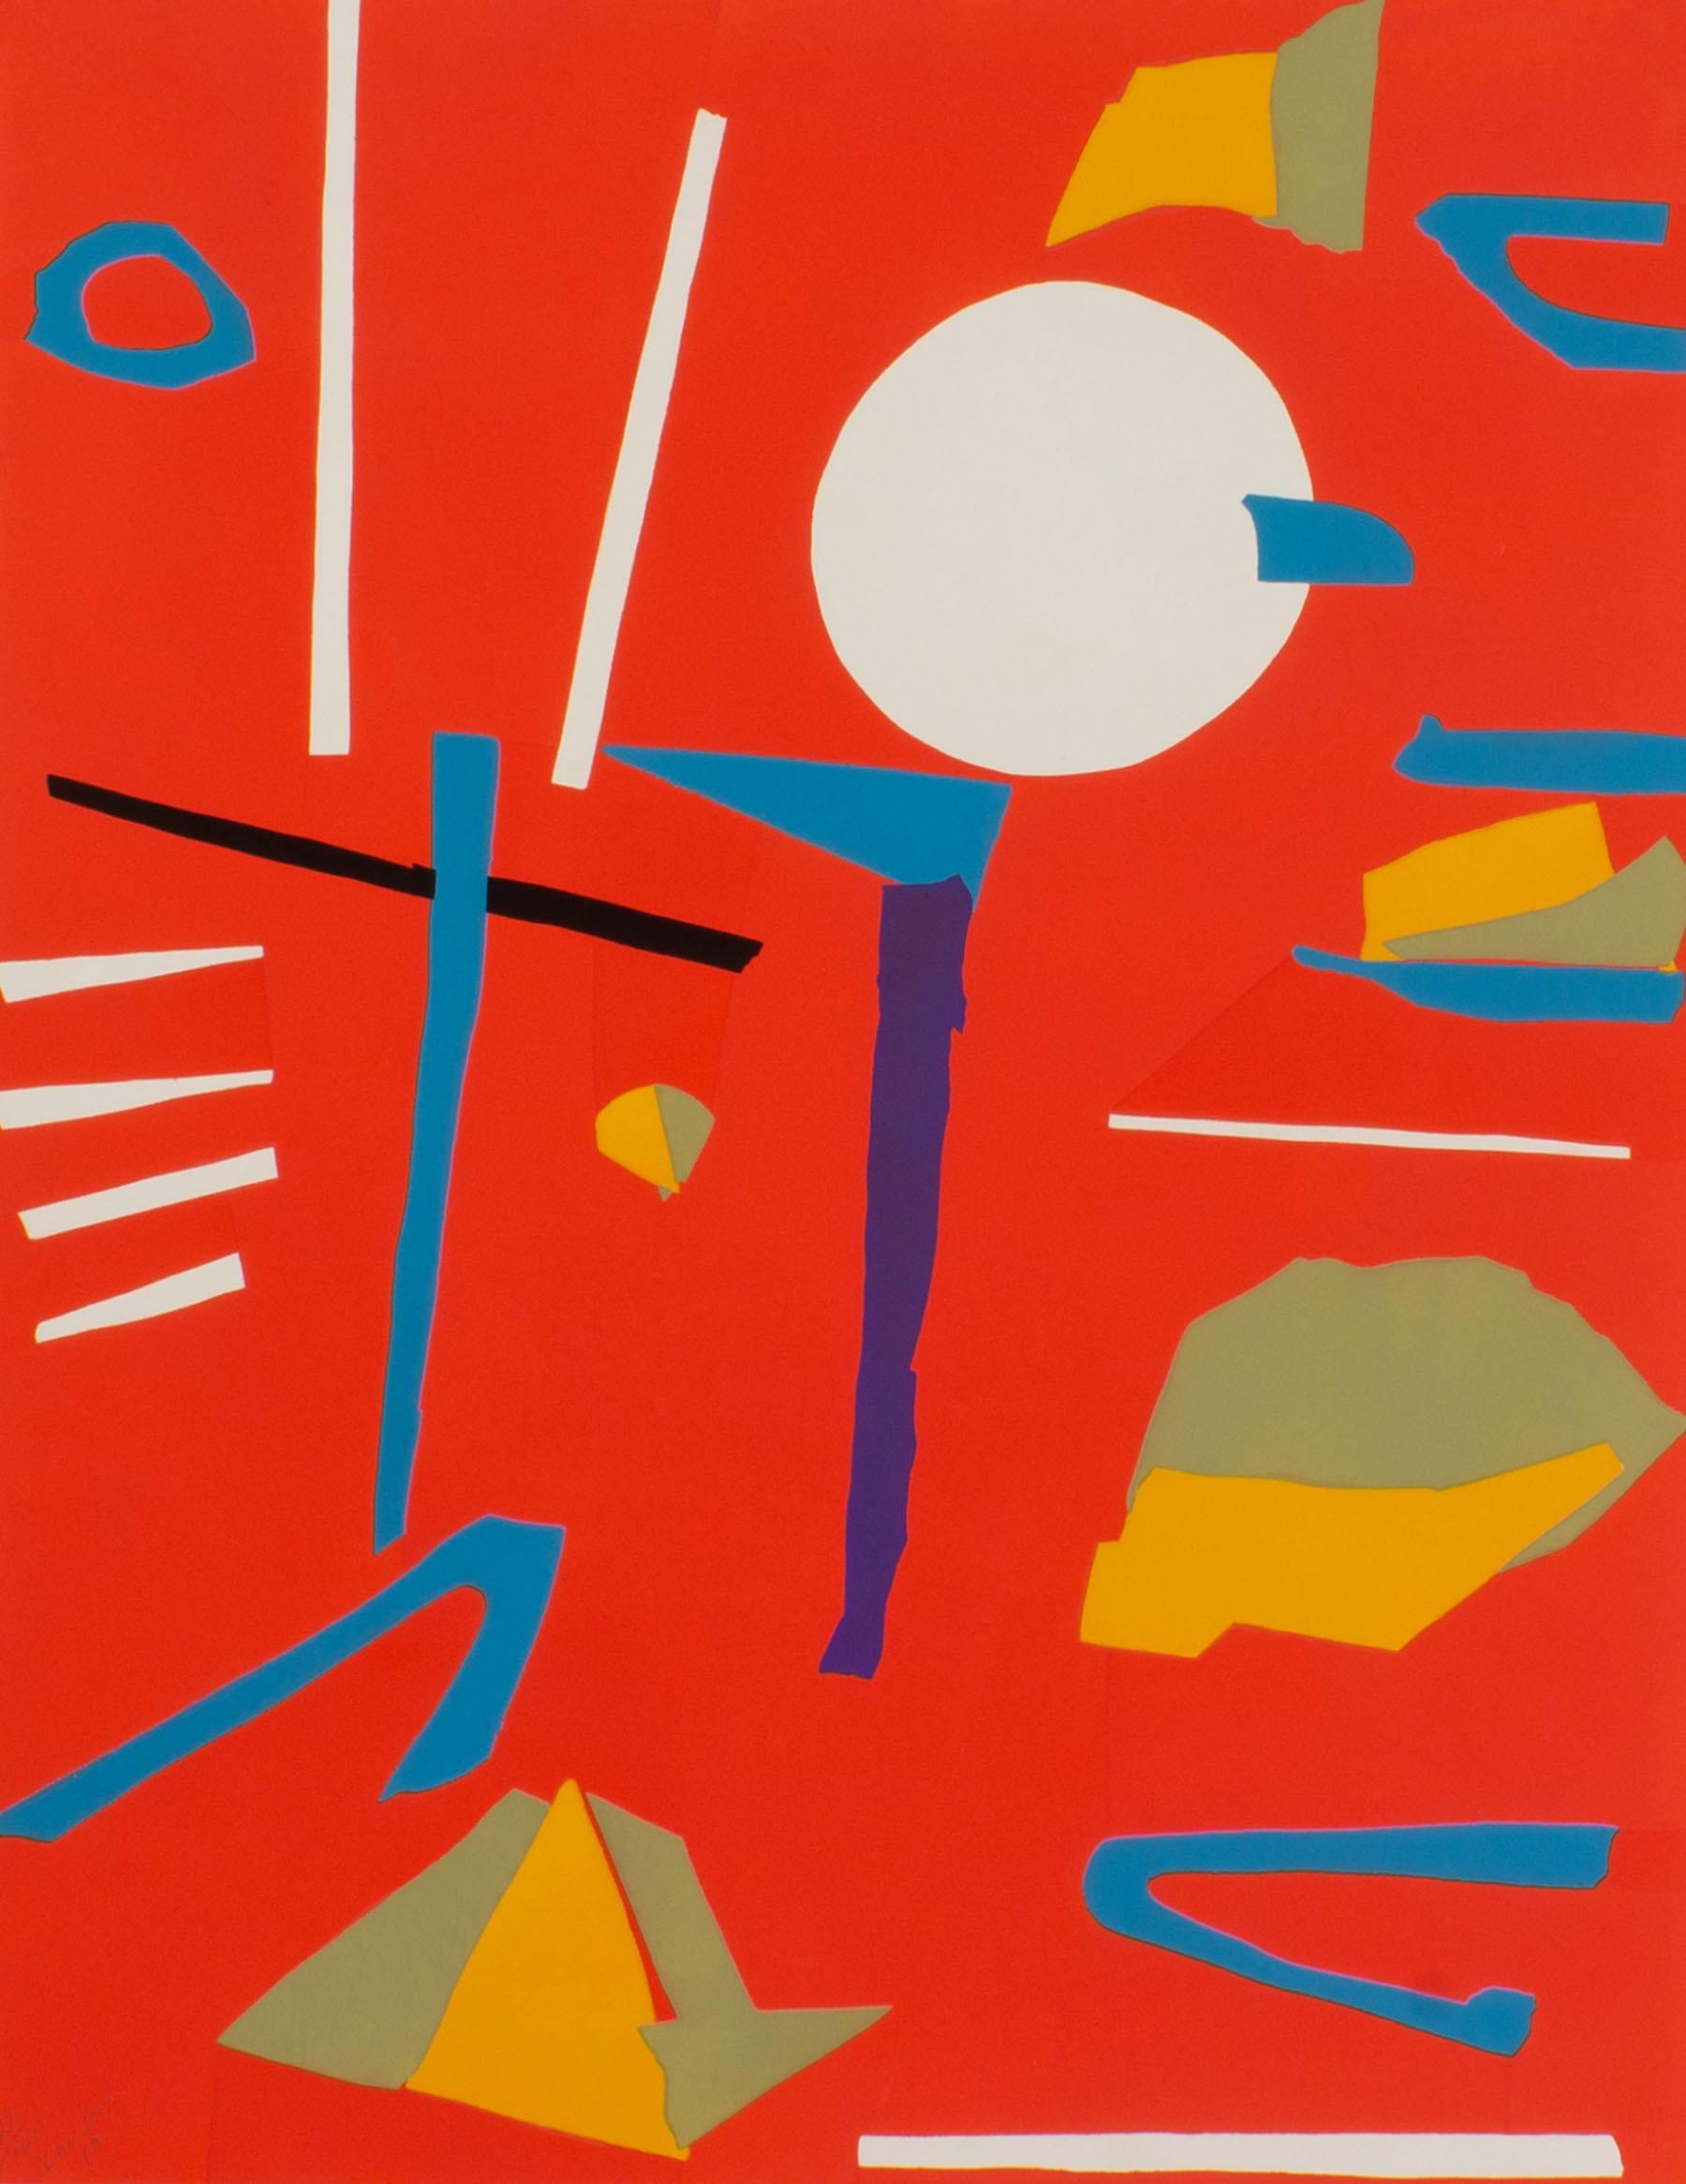 A 1969 limited edition abstract serigraph by the Russian artist Andre Lanskoy (1902-1976). Signed to the lower left, this vibrant piece depicts a composition replete with colorful abstract objects floating upon a bright red ground. The serigraph is